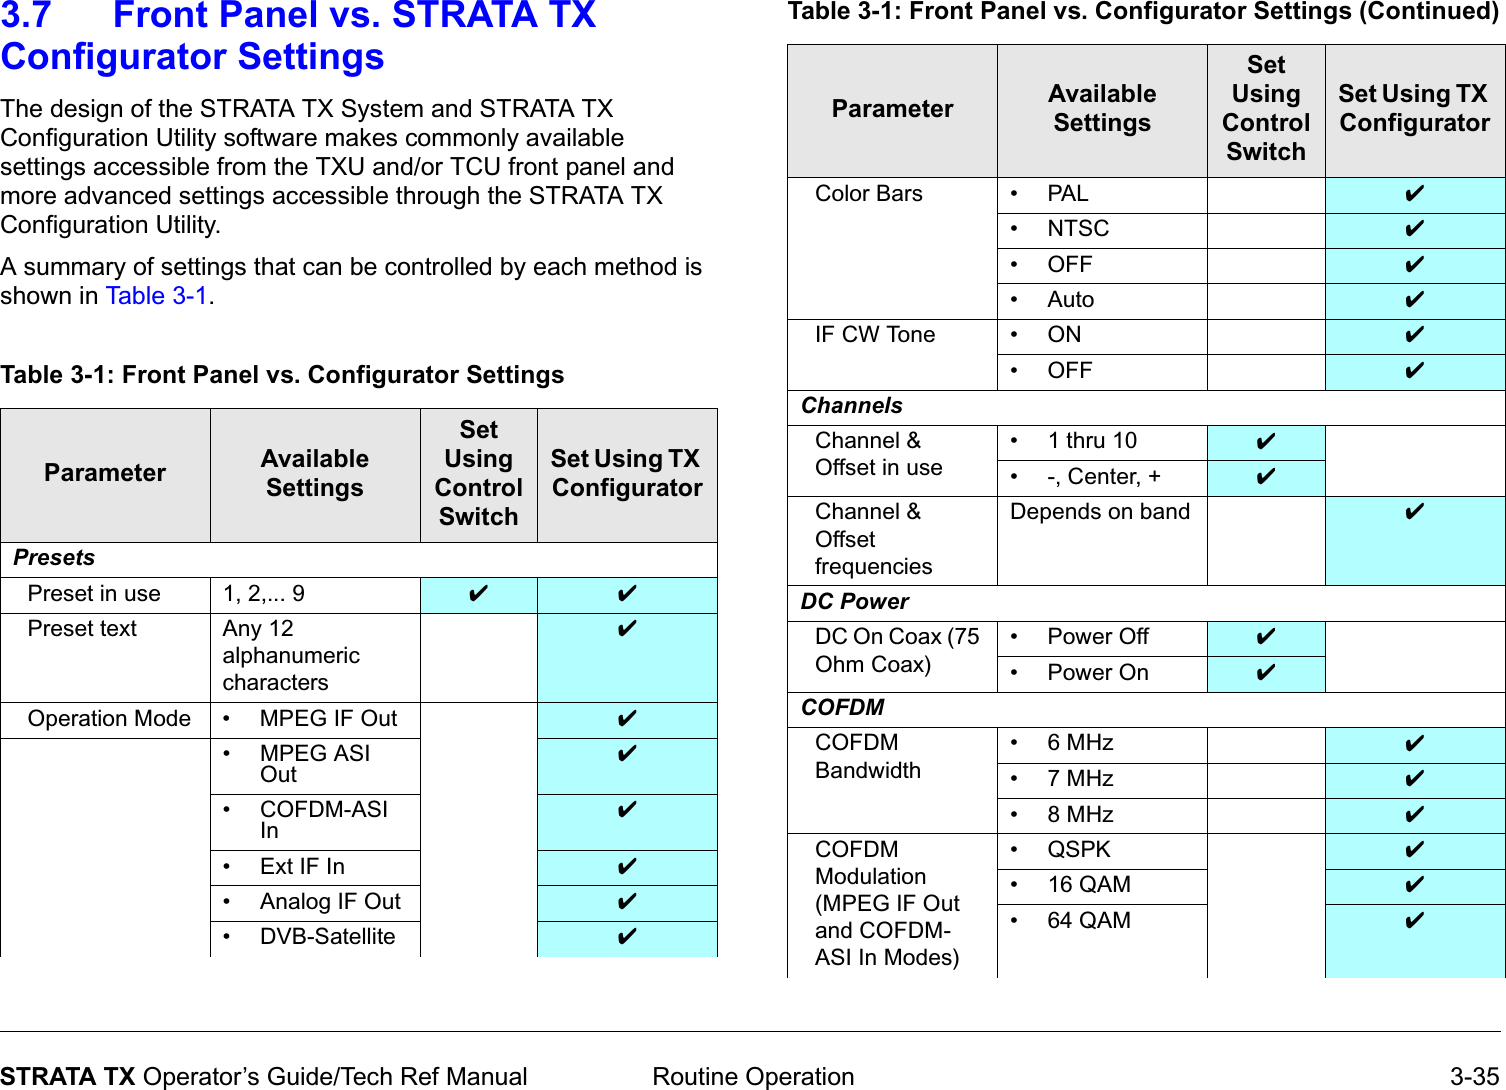  Routine Operation 3-35STRATA TX Operator’s Guide/Tech Ref Manual3.7 Front Panel vs. STRATA TX Configurator SettingsThe design of the STRATA TX System and STRATA TX Configuration Utility software makes commonly available settings accessible from the TXU and/or TCU front panel and more advanced settings accessible through the STRATA TX Configuration Utility.A summary of settings that can be controlled by each method is shown in Table 3-1.Table 3-1: Front Panel vs. Configurator SettingsParameter AvailableSettingsSet Using Control SwitchSet Using TX ConfiguratorPresetsPreset in use 1, 2,... 9 ✔ ✔Preset text Any 12 alphanumeric characters✔Operation Mode • MPEG IF Out  ✔• MPEG ASI Out✔• COFDM-ASI In✔• Ext IF In ✔• Analog IF Out ✔• DVB-Satellite ✔Color Bars • PAL ✔•NTSC ✔•OFF ✔•Auto ✔IF CW Tone • ON ✔•OFF ✔ChannelsChannel &amp; Offset in use• 1 thru 10 ✔• -, Center, + ✔Channel &amp; Offset frequenciesDepends on band ✔DC PowerDC On Coax (75 Ohm Coax)• Power Off ✔• Power On ✔COFDM COFDM Bandwidth•6 MHz ✔•7 MHz ✔•8 MHz ✔COFDM Modulation (MPEG IF Out and COFDM-ASI In Modes)• QSPK ✔• 16 QAM ✔• 64 QAM ✔Table 3-1: Front Panel vs. Configurator Settings (Continued)Parameter AvailableSettingsSet Using Control SwitchSet Using TX Configurator